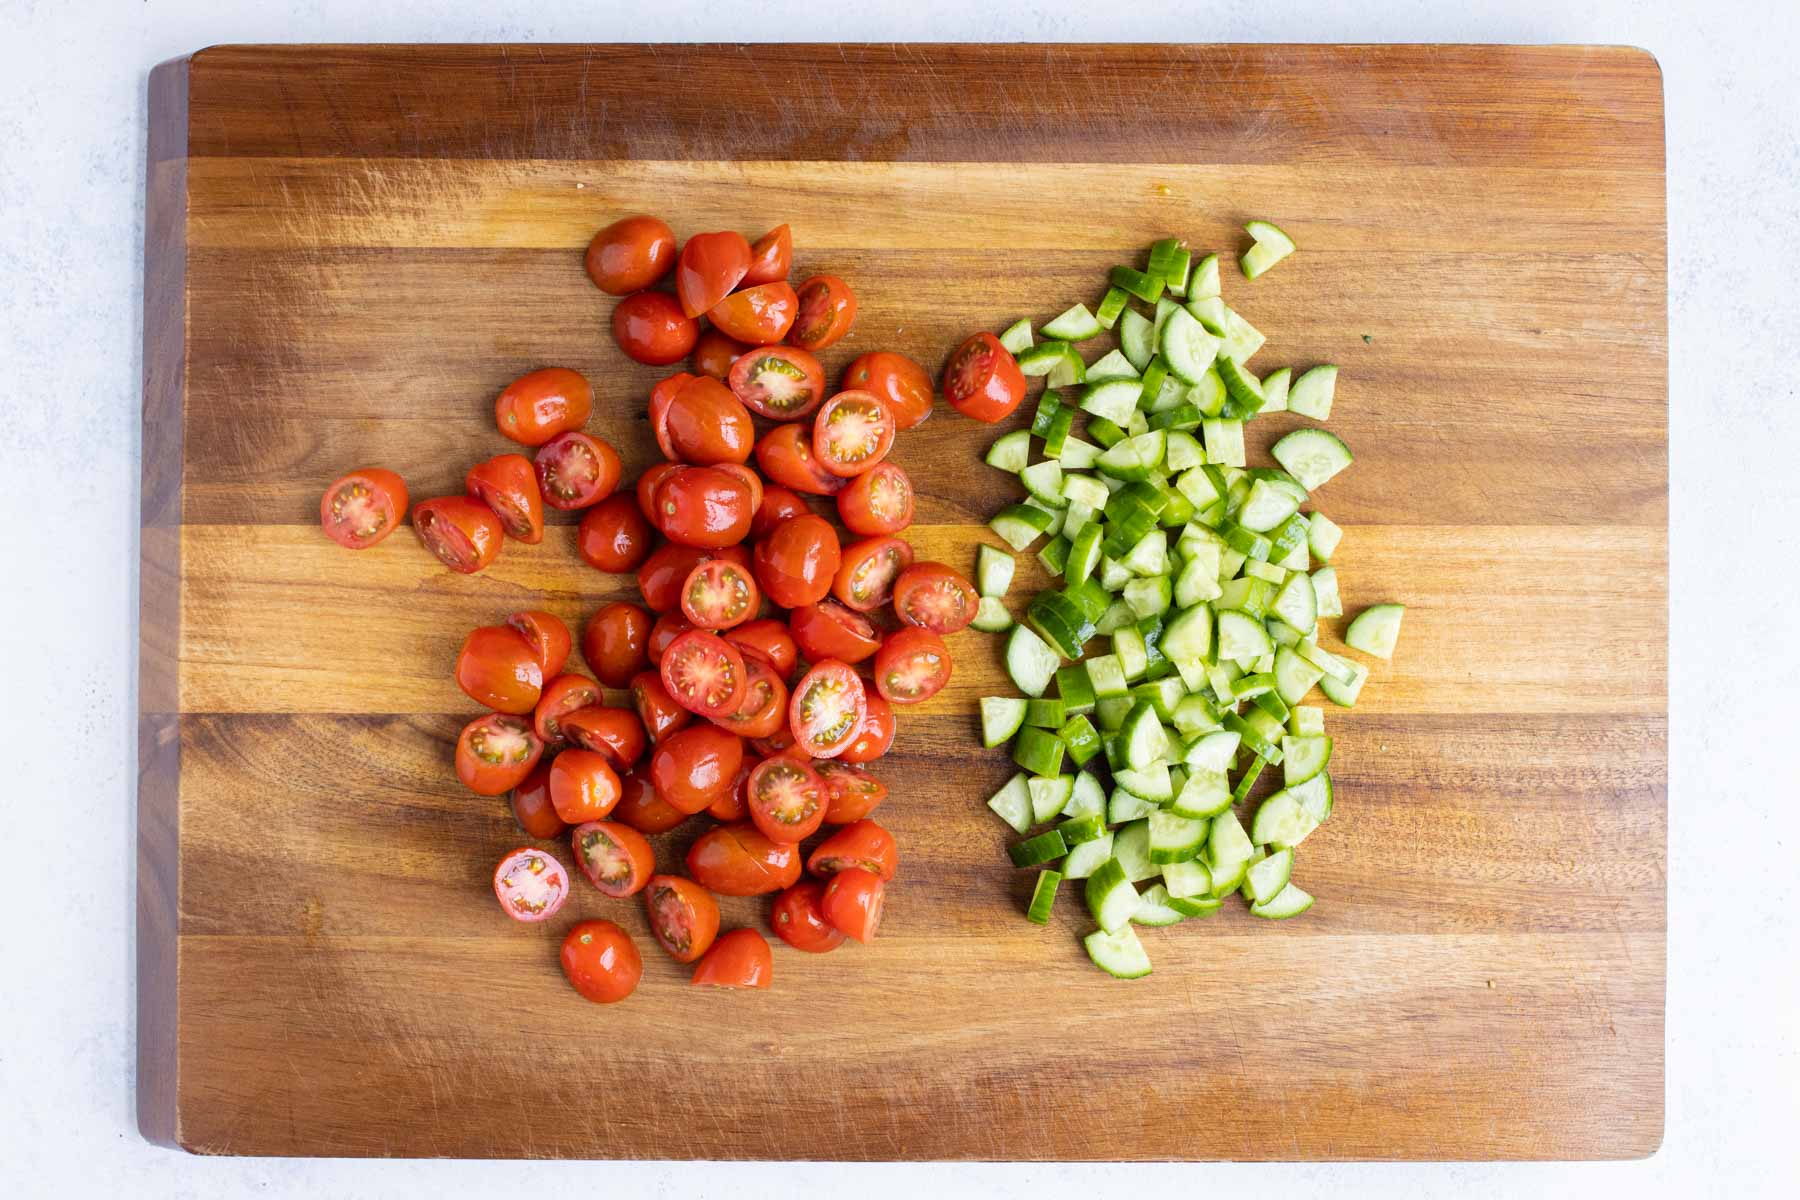 Cherry tomatoes and cucumbers are chopped on a cutting board.